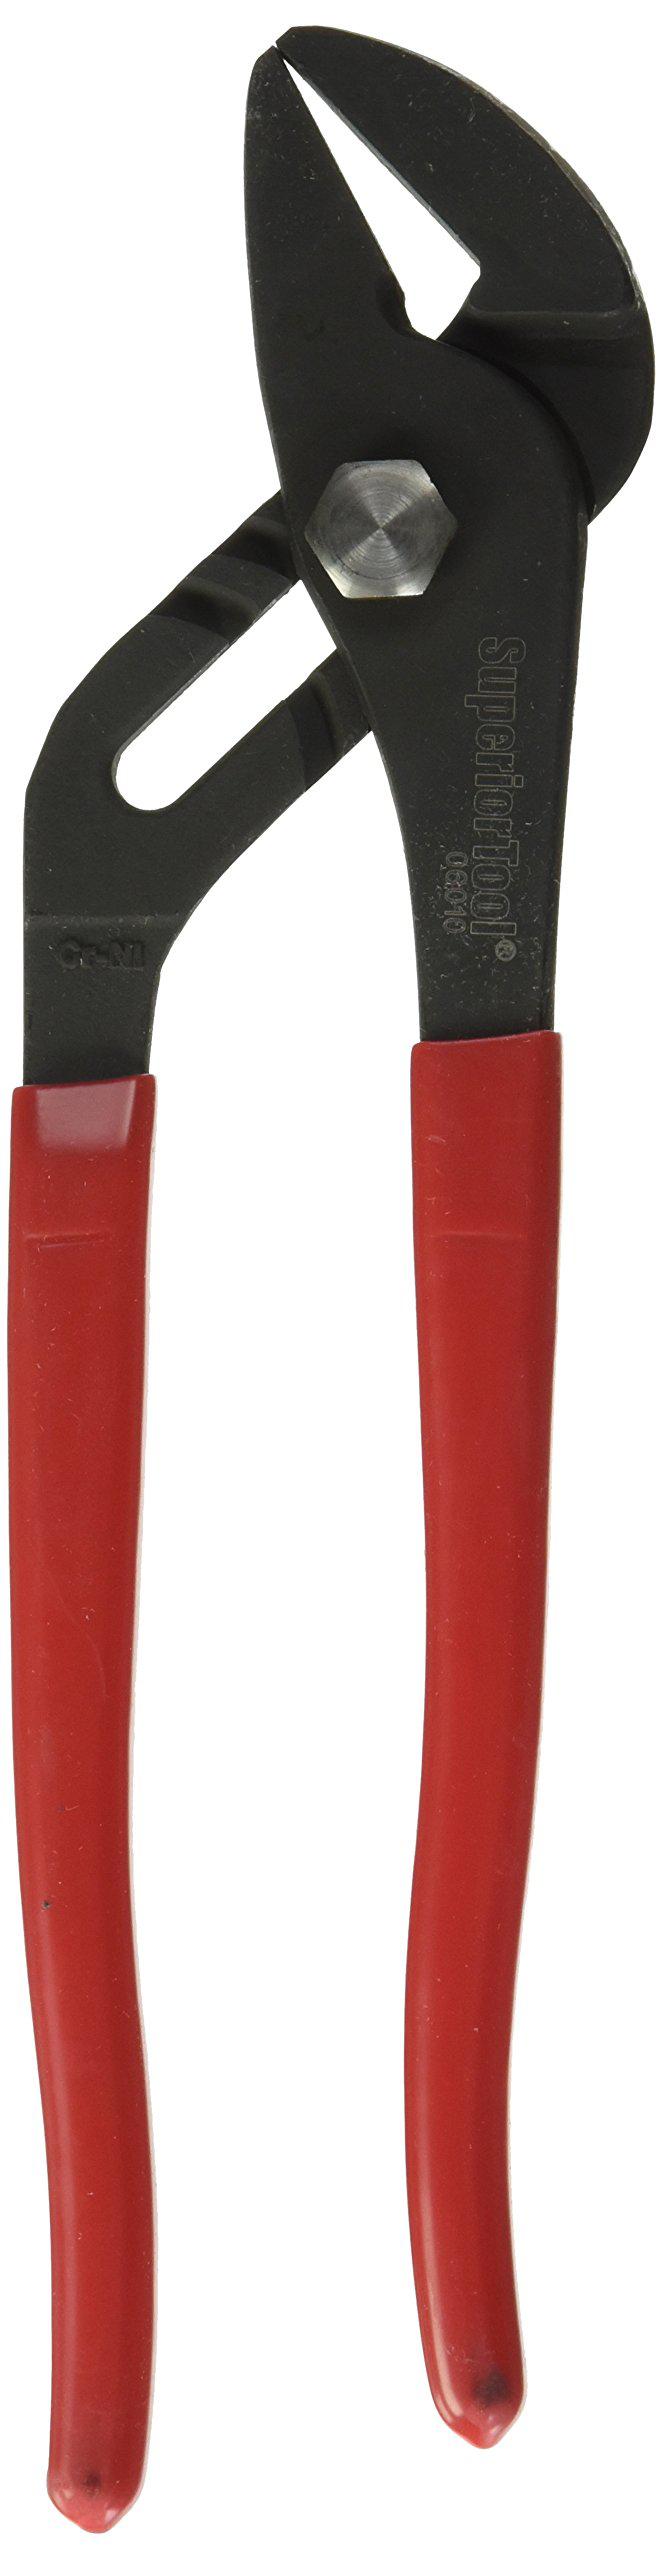 superior tool 06010 smooth jaw pipe wrench pliers